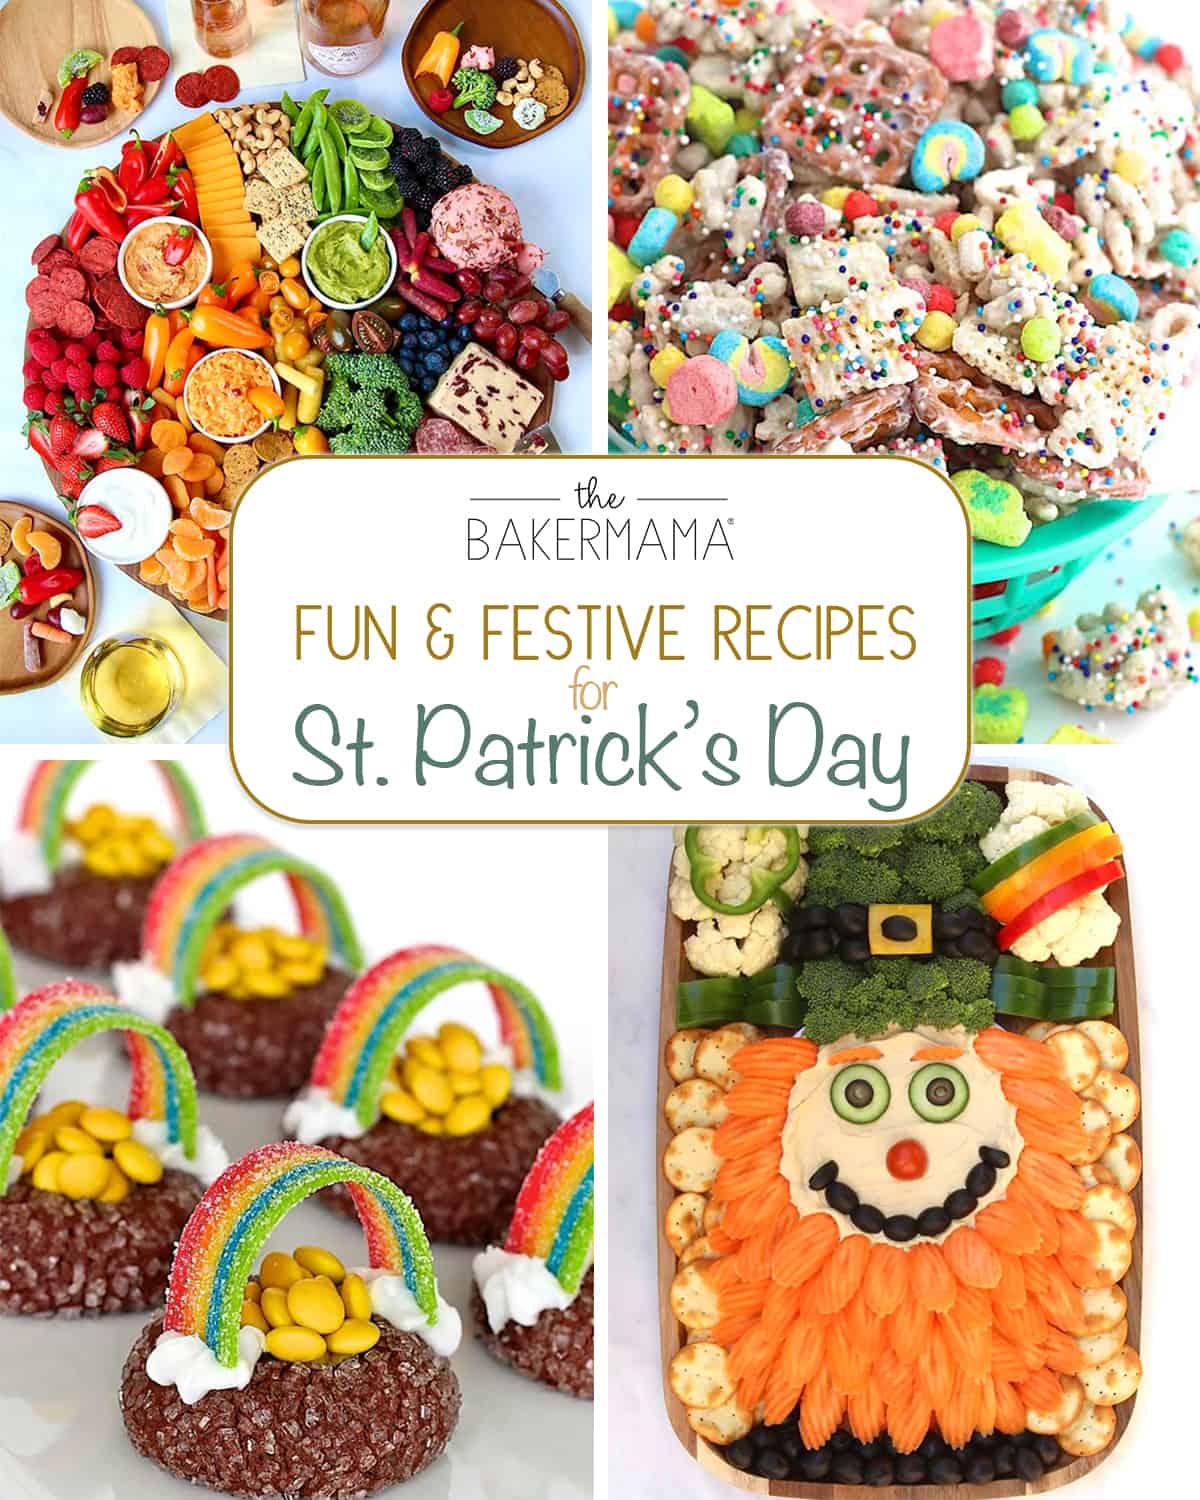 Recipes for St. Patrick's Day by The BakerMama